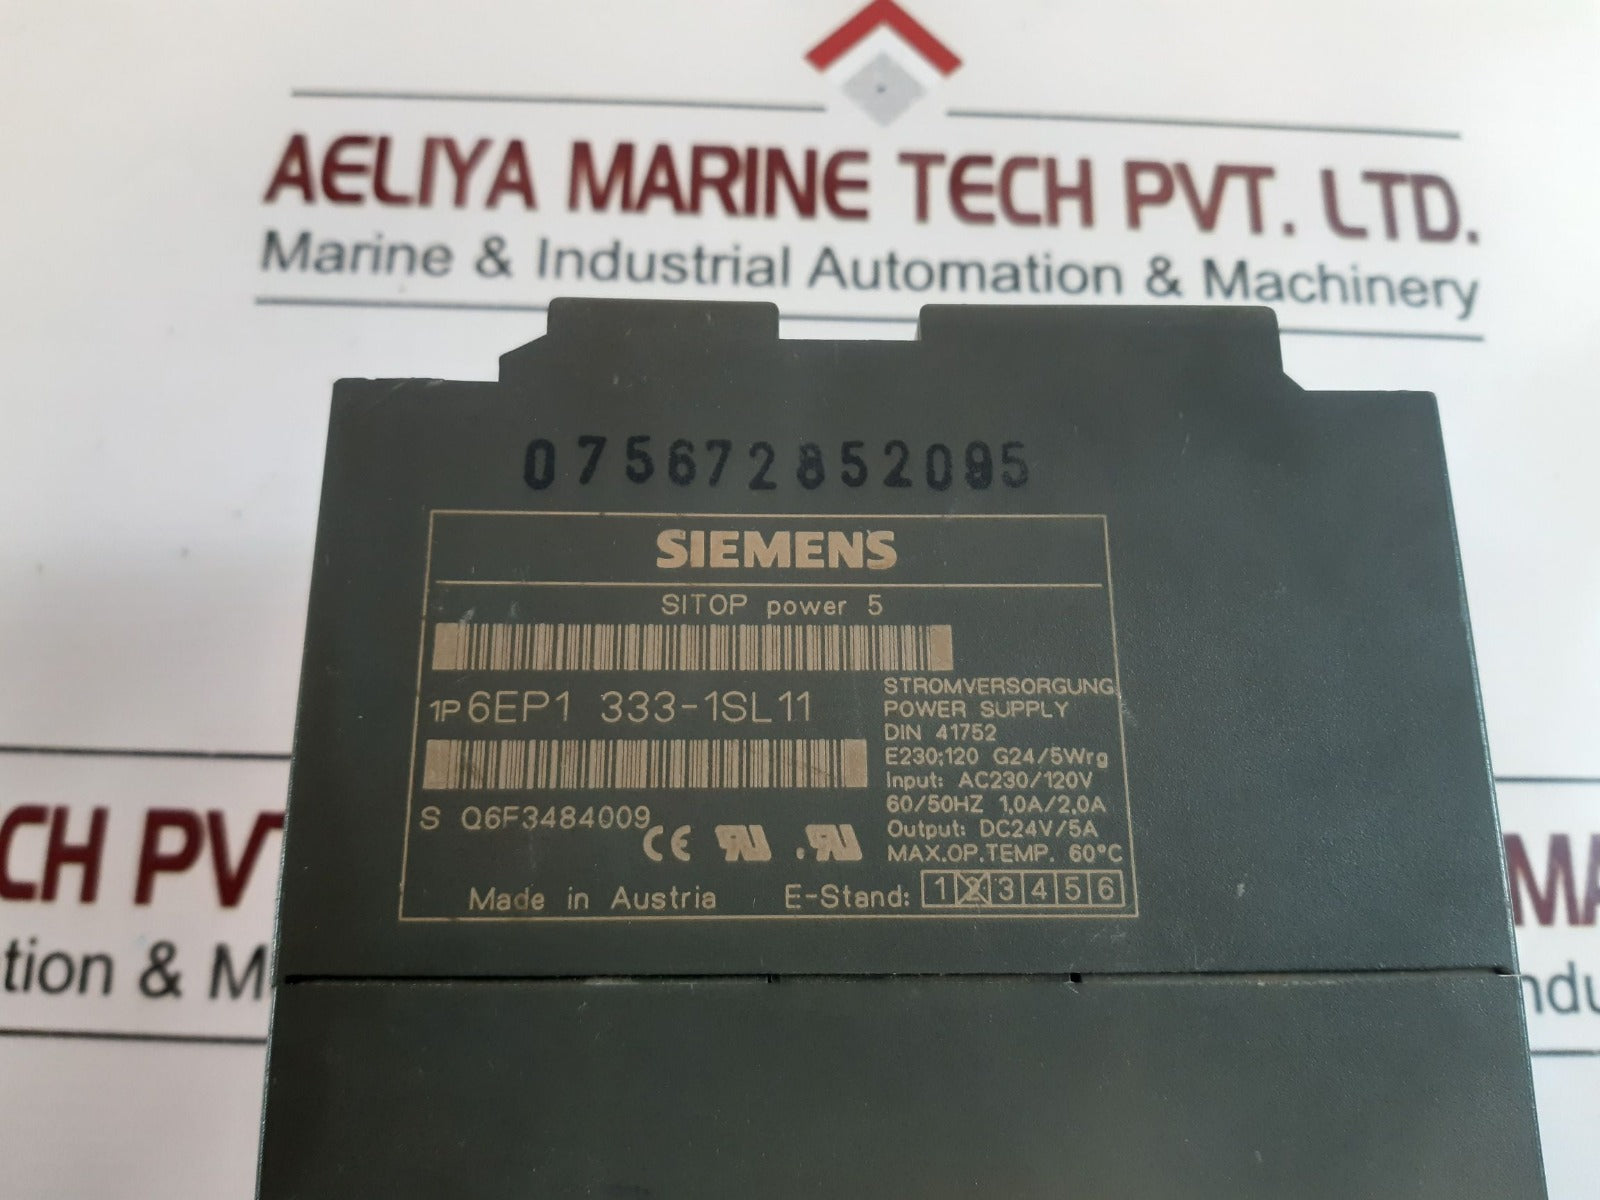 Siemens 6Ep1 333-1Sl11 Sitop Power 5 Power Supply E-stand 1X34562